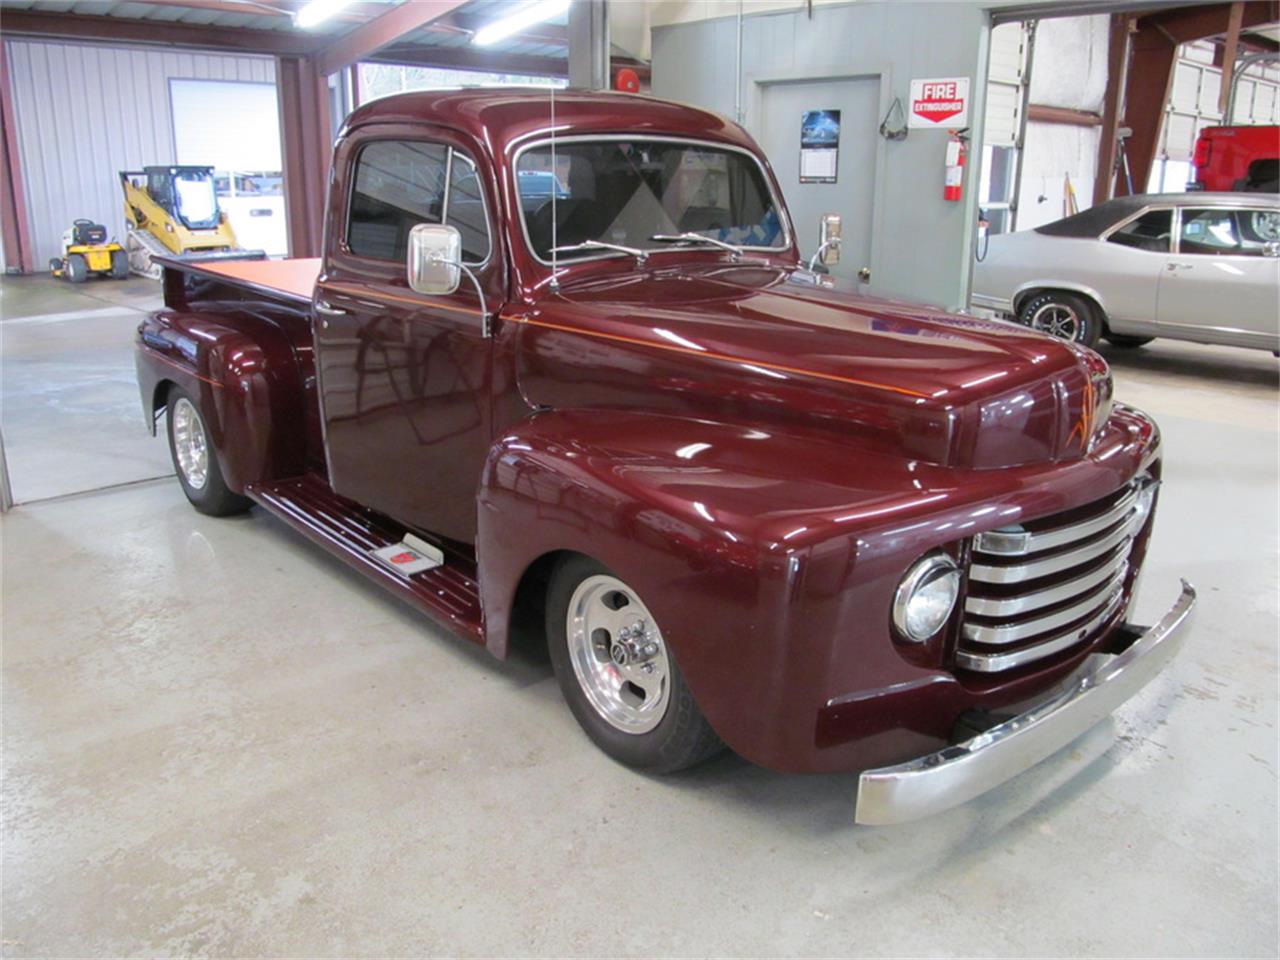 1952 Ford Pickup For Sale Classiccarscom Cc 1190401